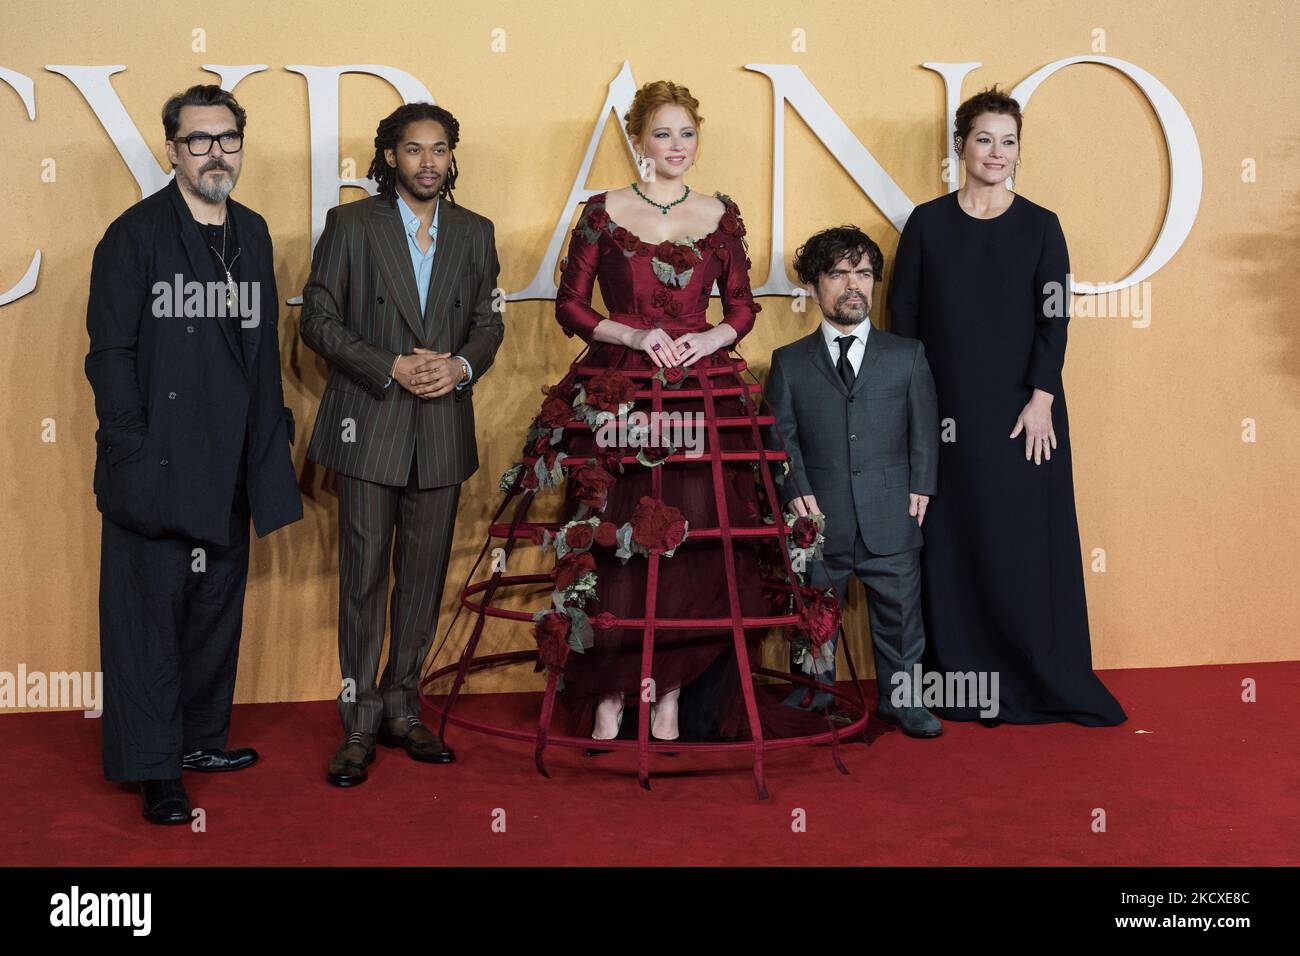 LONDON, UNITED KINGDOM - DECEMBER 07, 2021: Joe Wright, Kelvin Harrison Jr., Haley Bennett, Peter Dinklage and Erica Schmidt attend the UK premiere of 'Cyrano' at Odeon Luxe Leicester Square on December 07, 2021 in London, England. (Photo by WIktor Szymanowicz/NurPhoto) Stock Photo